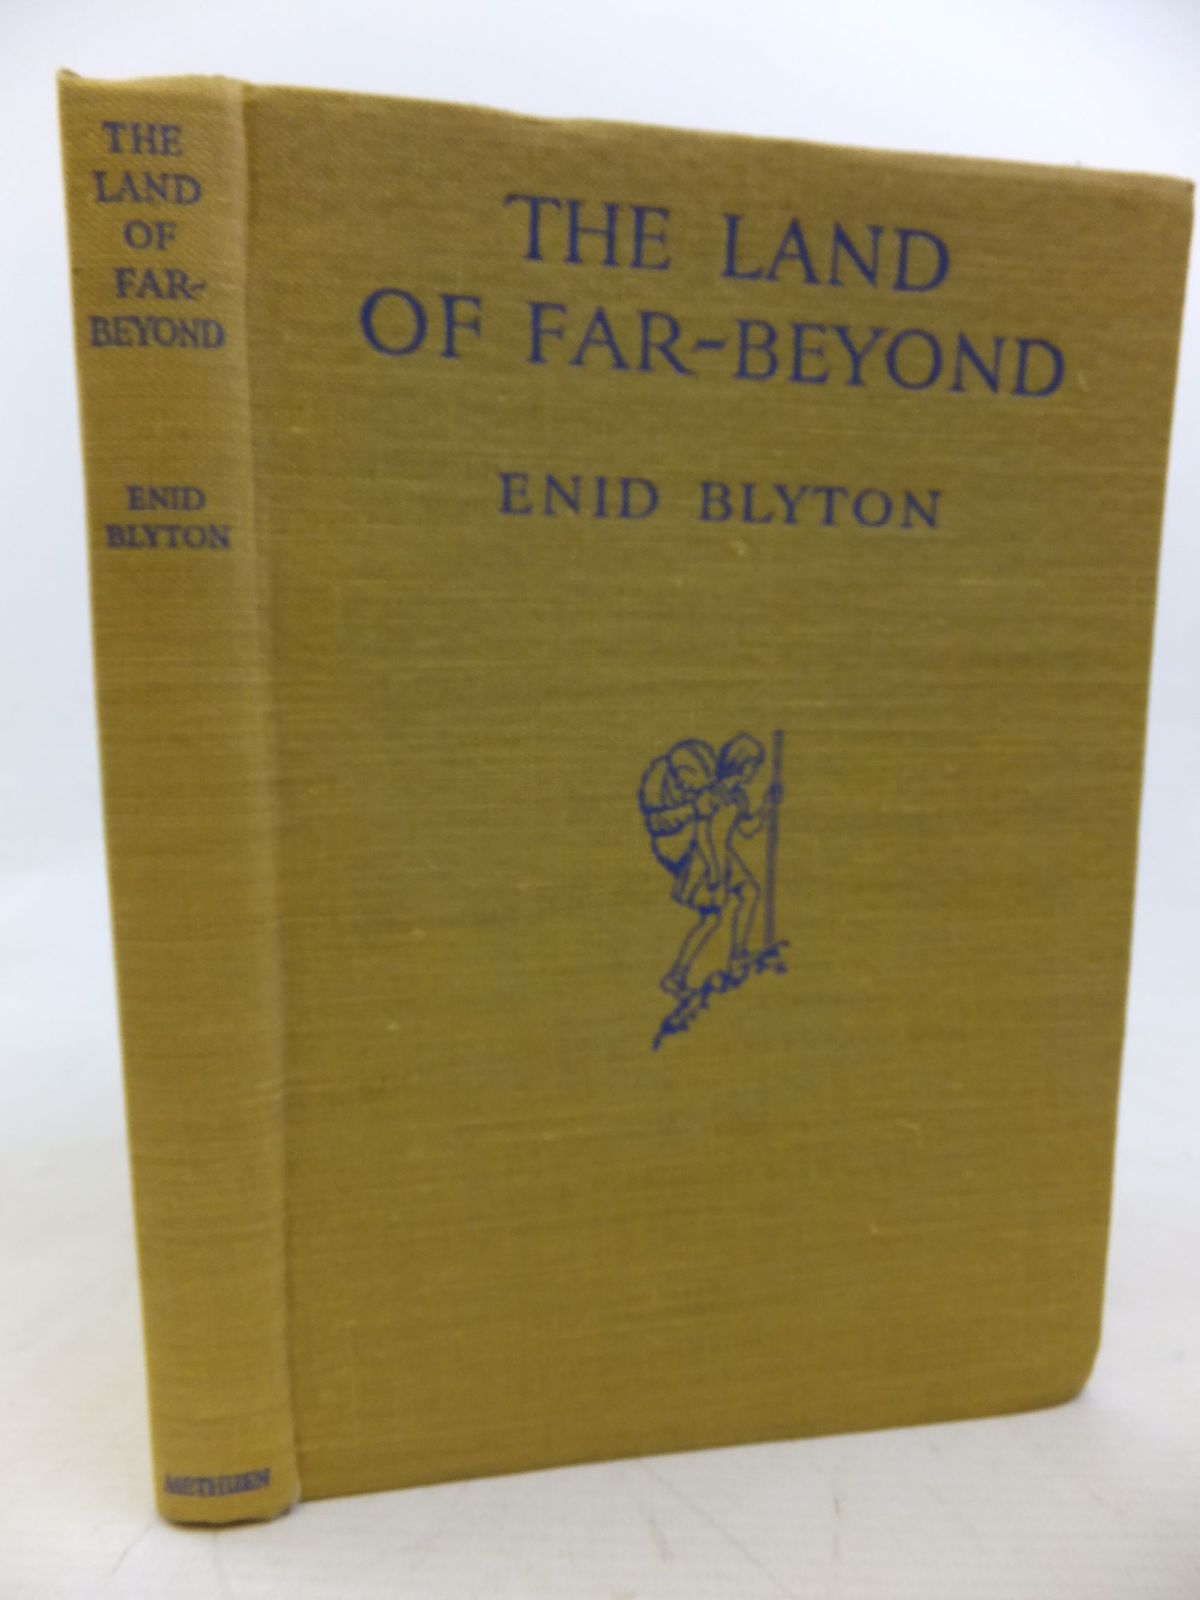 Photo of THE LAND OF FAR BEYOND written by Blyton, Enid illustrated by Knowles, Horace J. published by Methuen & Co. Ltd. (STOCK CODE: 2116291)  for sale by Stella & Rose's Books